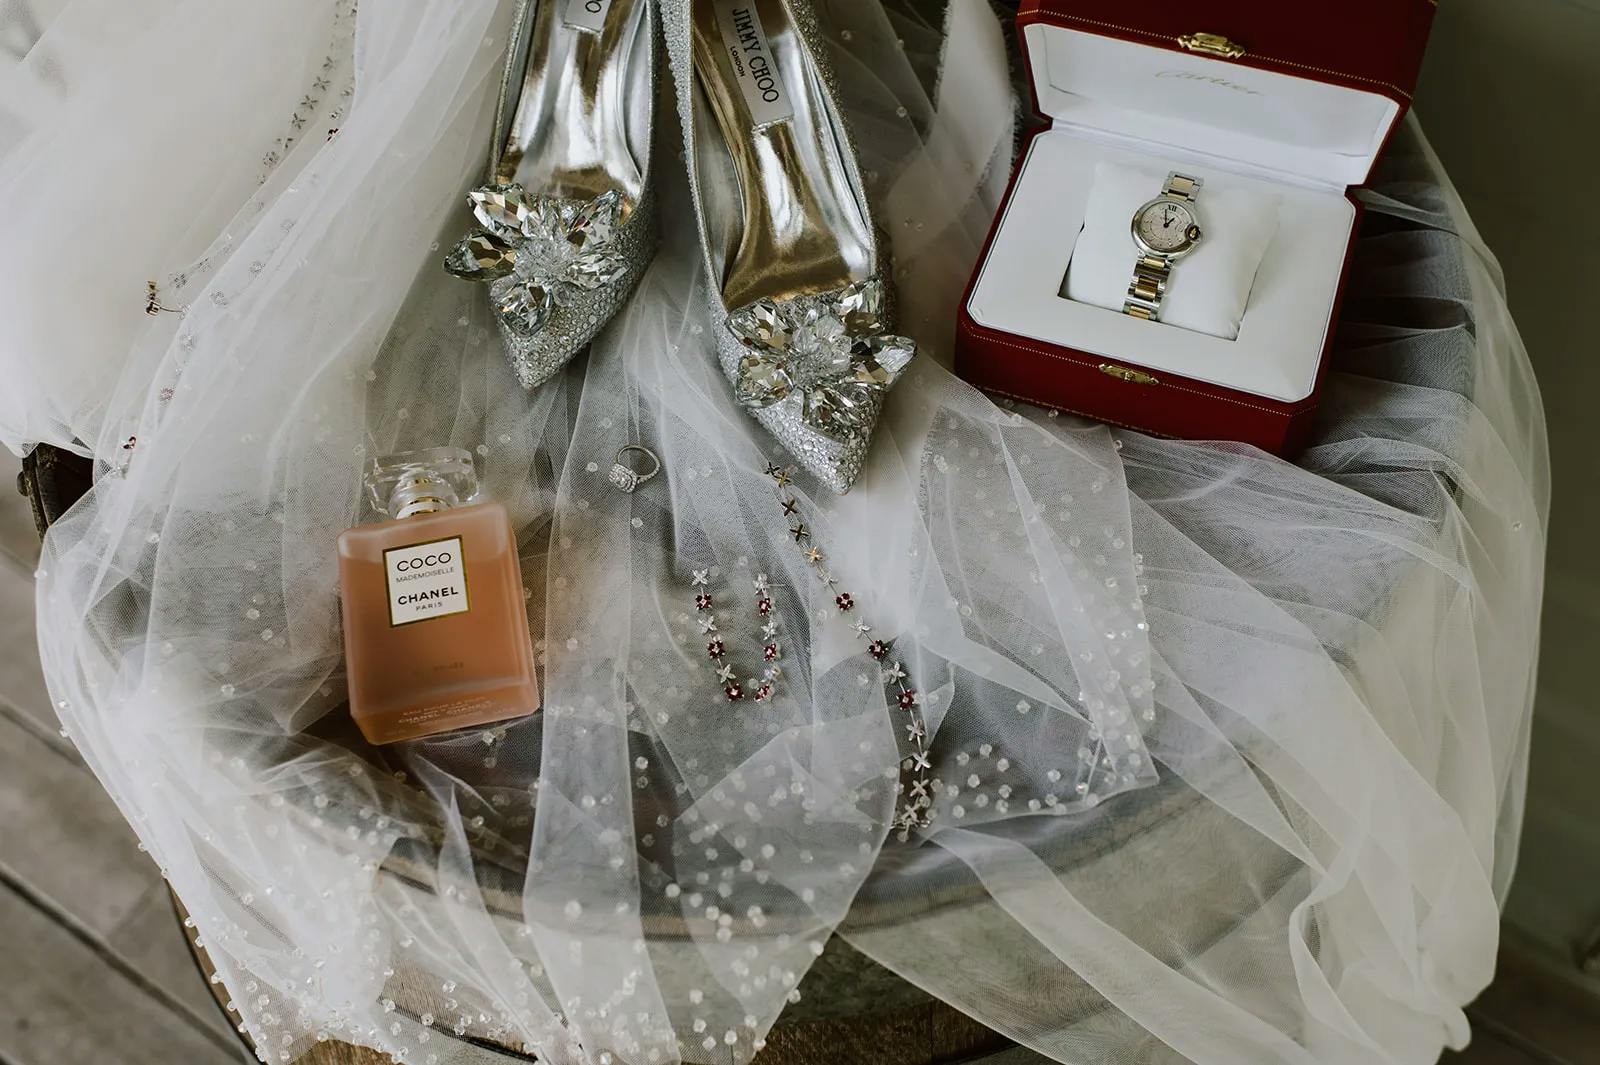 Brides shoes, watch and veil